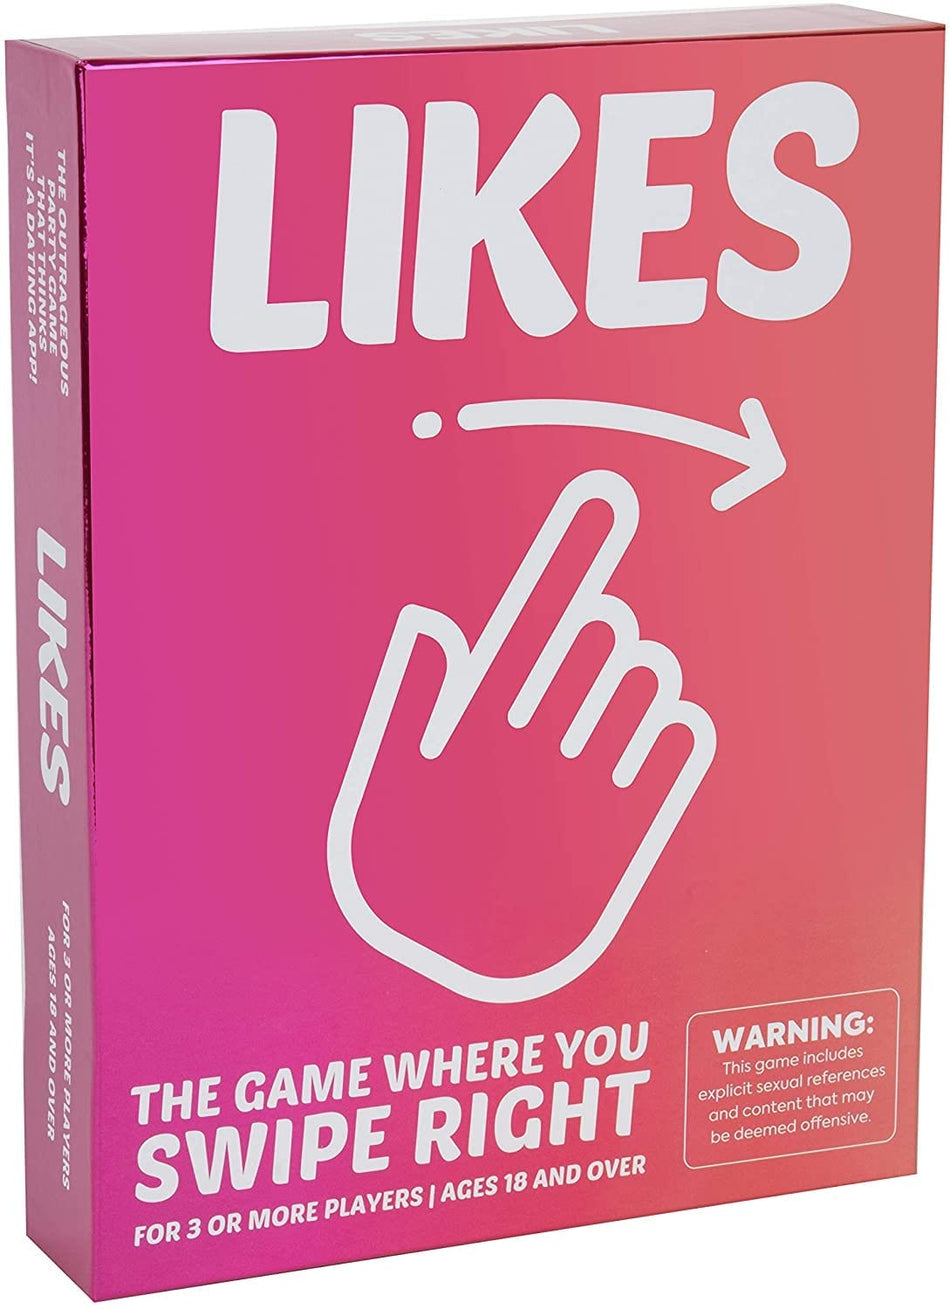 Likes - The Game Where You Swipe Right